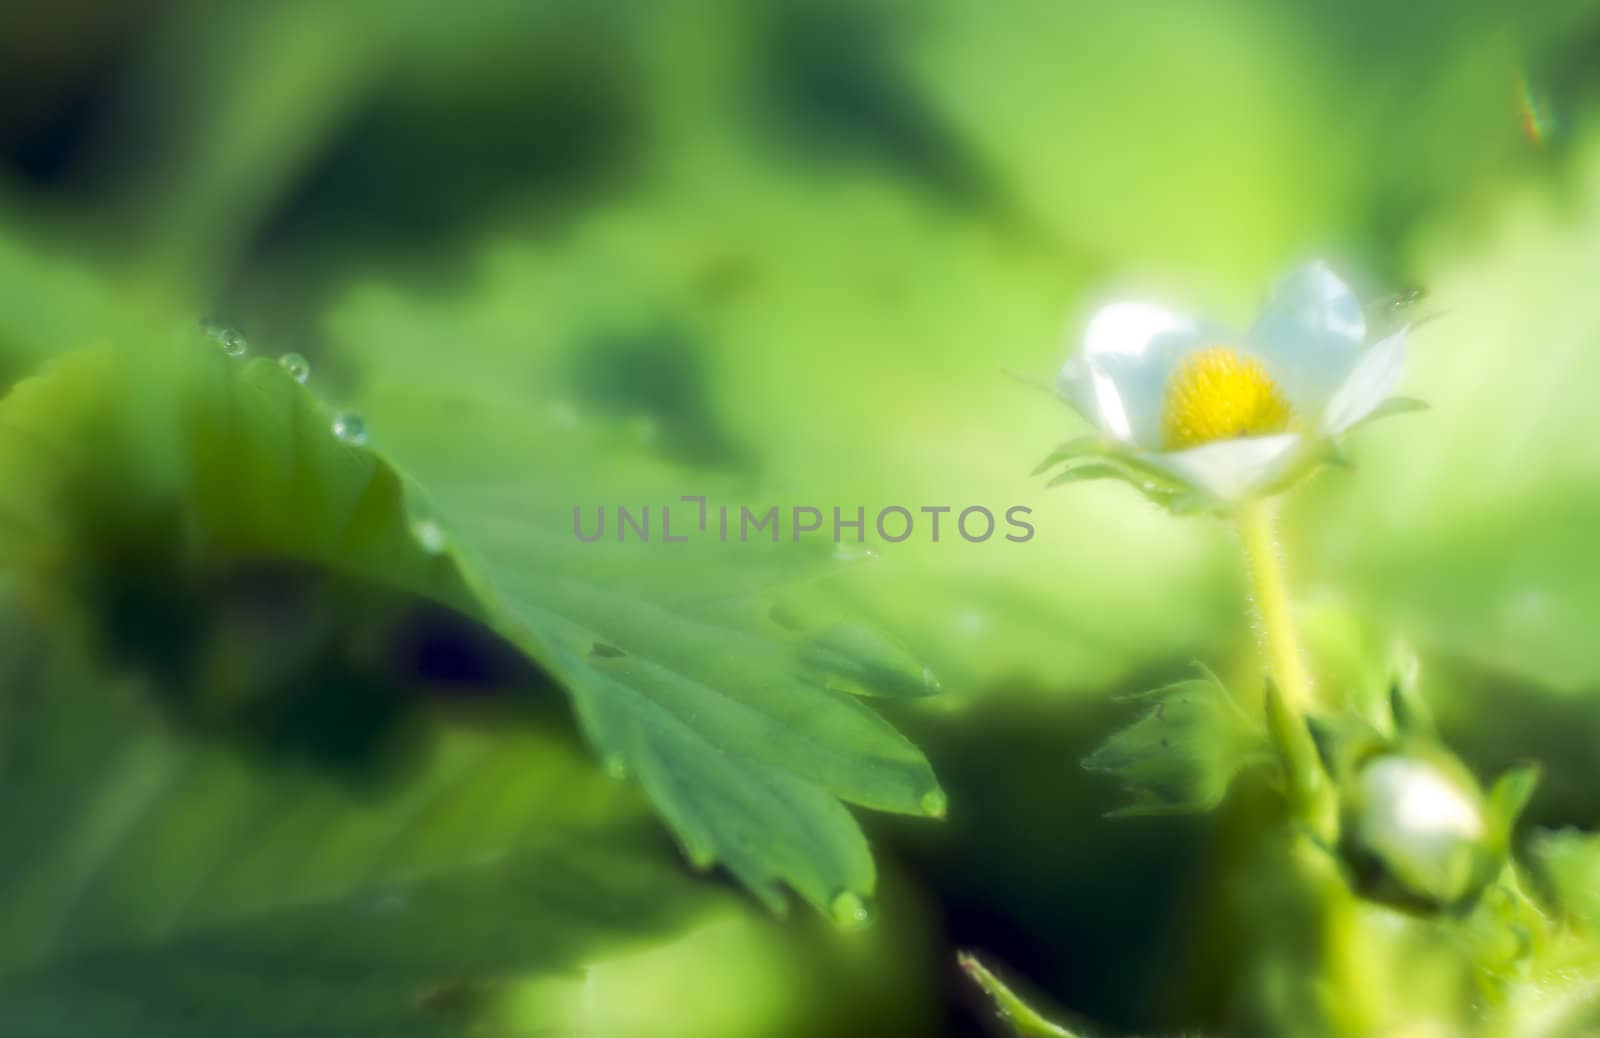 Strawberry flower and green leaf with drops of morning dew through monocle lens